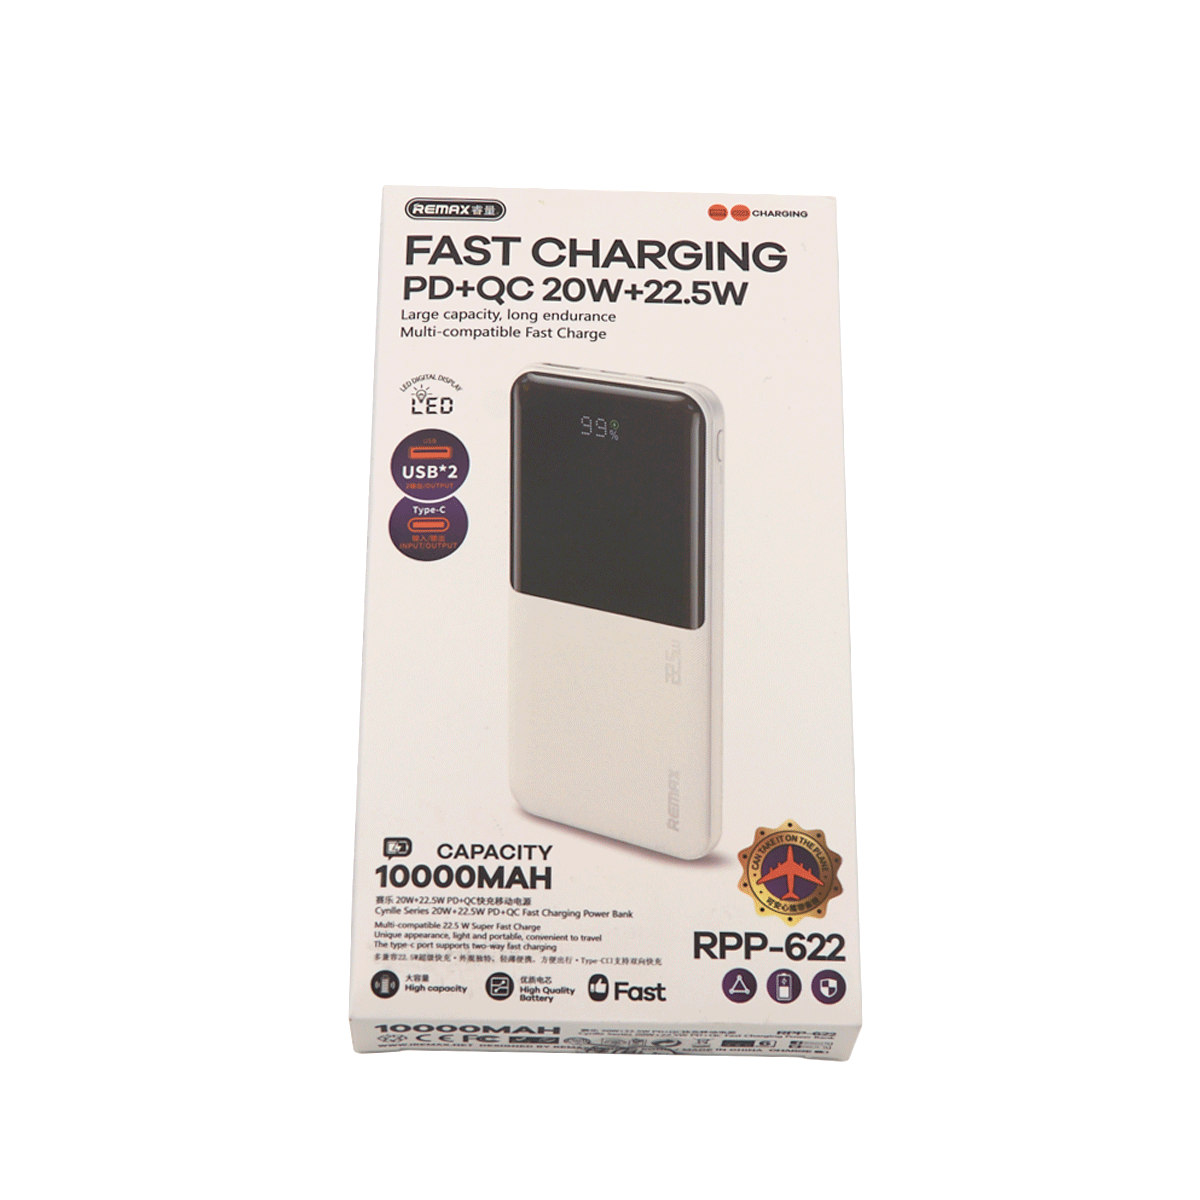 Power bank remax cynlle rpp-622 20w+22.5w pd/qc fast charge 10000mah (beli)